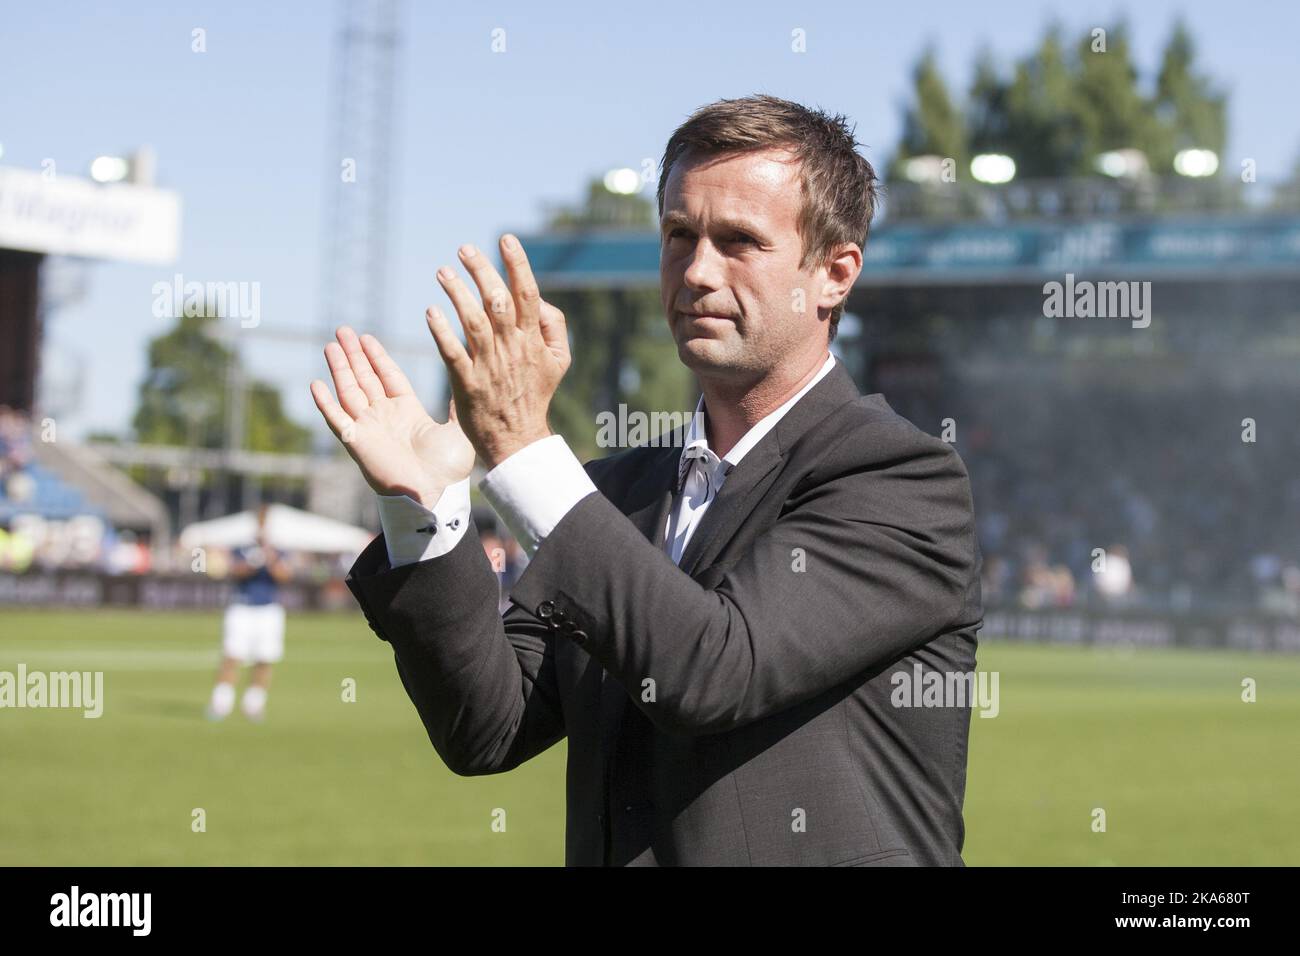 Outgoing manager of Stromsgodset FK and incoming manager of Scottish Premiership club Celtic Ronny Deila during farewell ceremony after half time of the match between Deila`s former club Stromsgodset and Haugesund in the Norwegian top football league in Drammen, 9 June 2014. Photo by Audun Braastad, NTB scanpix Stock Photo